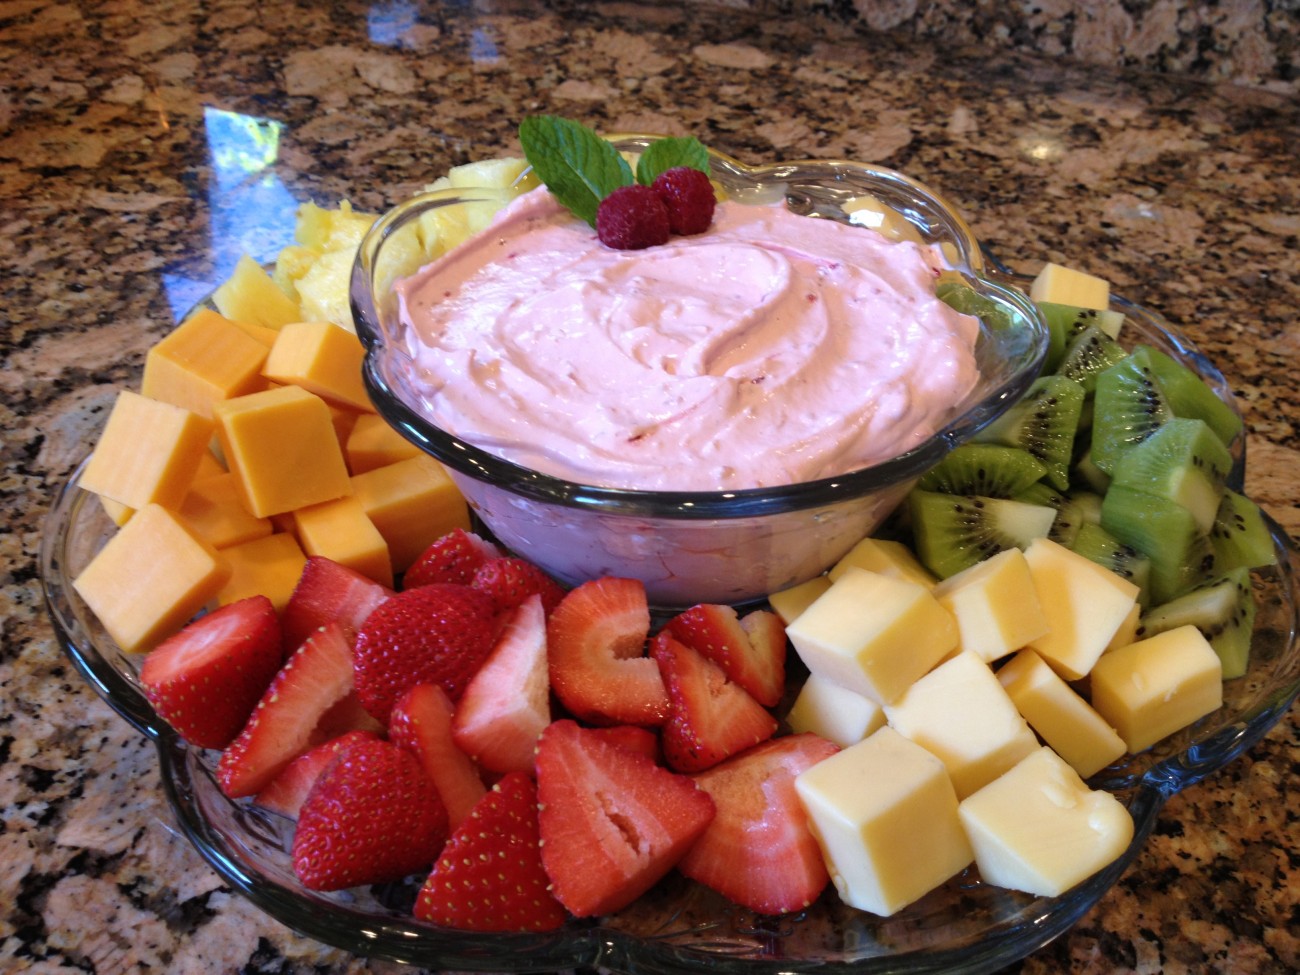 Fruit and cheese platter